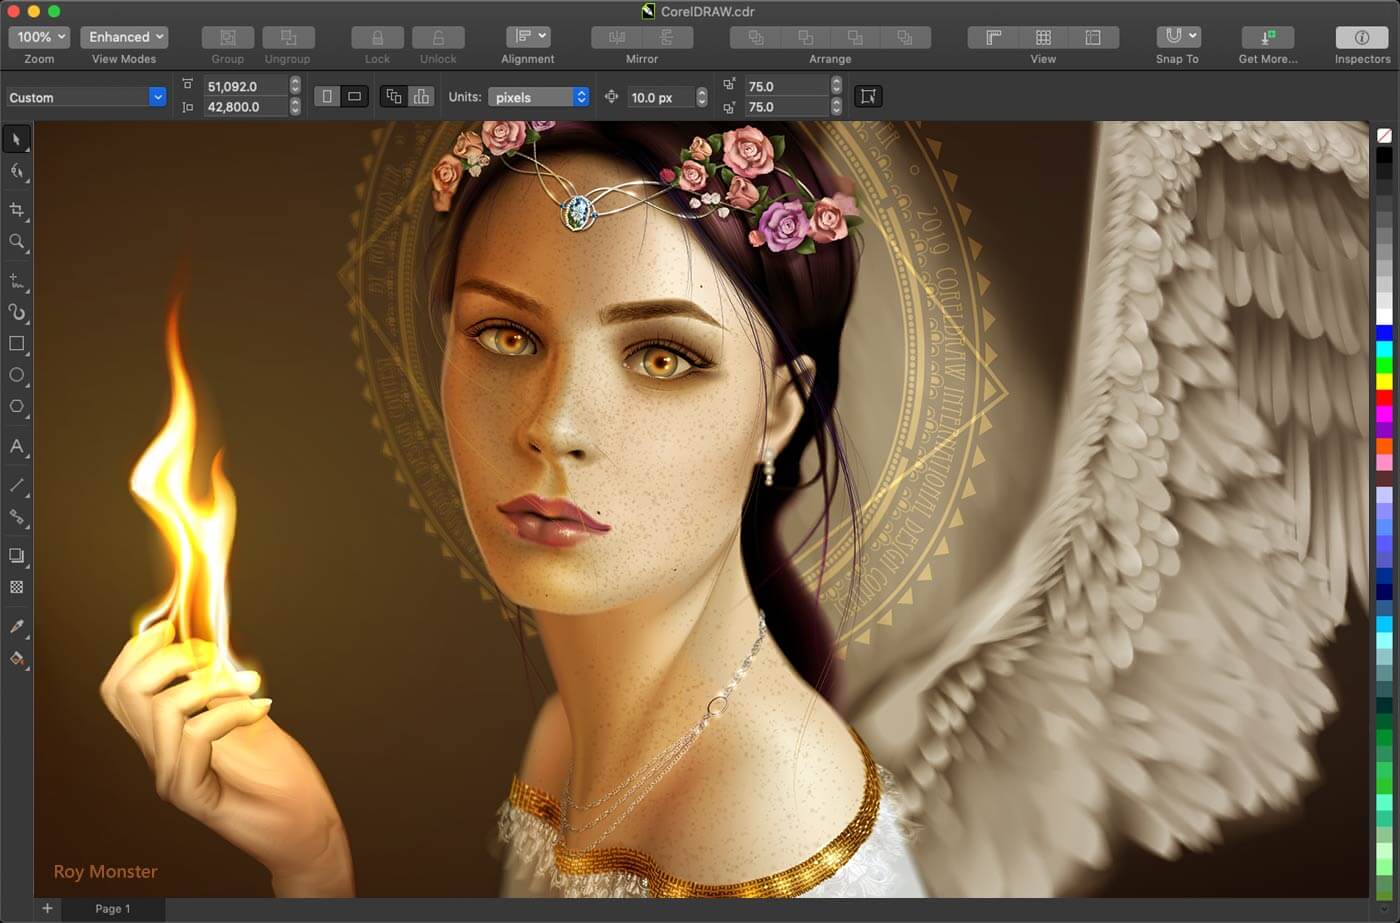 download the new version for apple CorelDRAW Graphics Suite 2022 v24.5.0.686